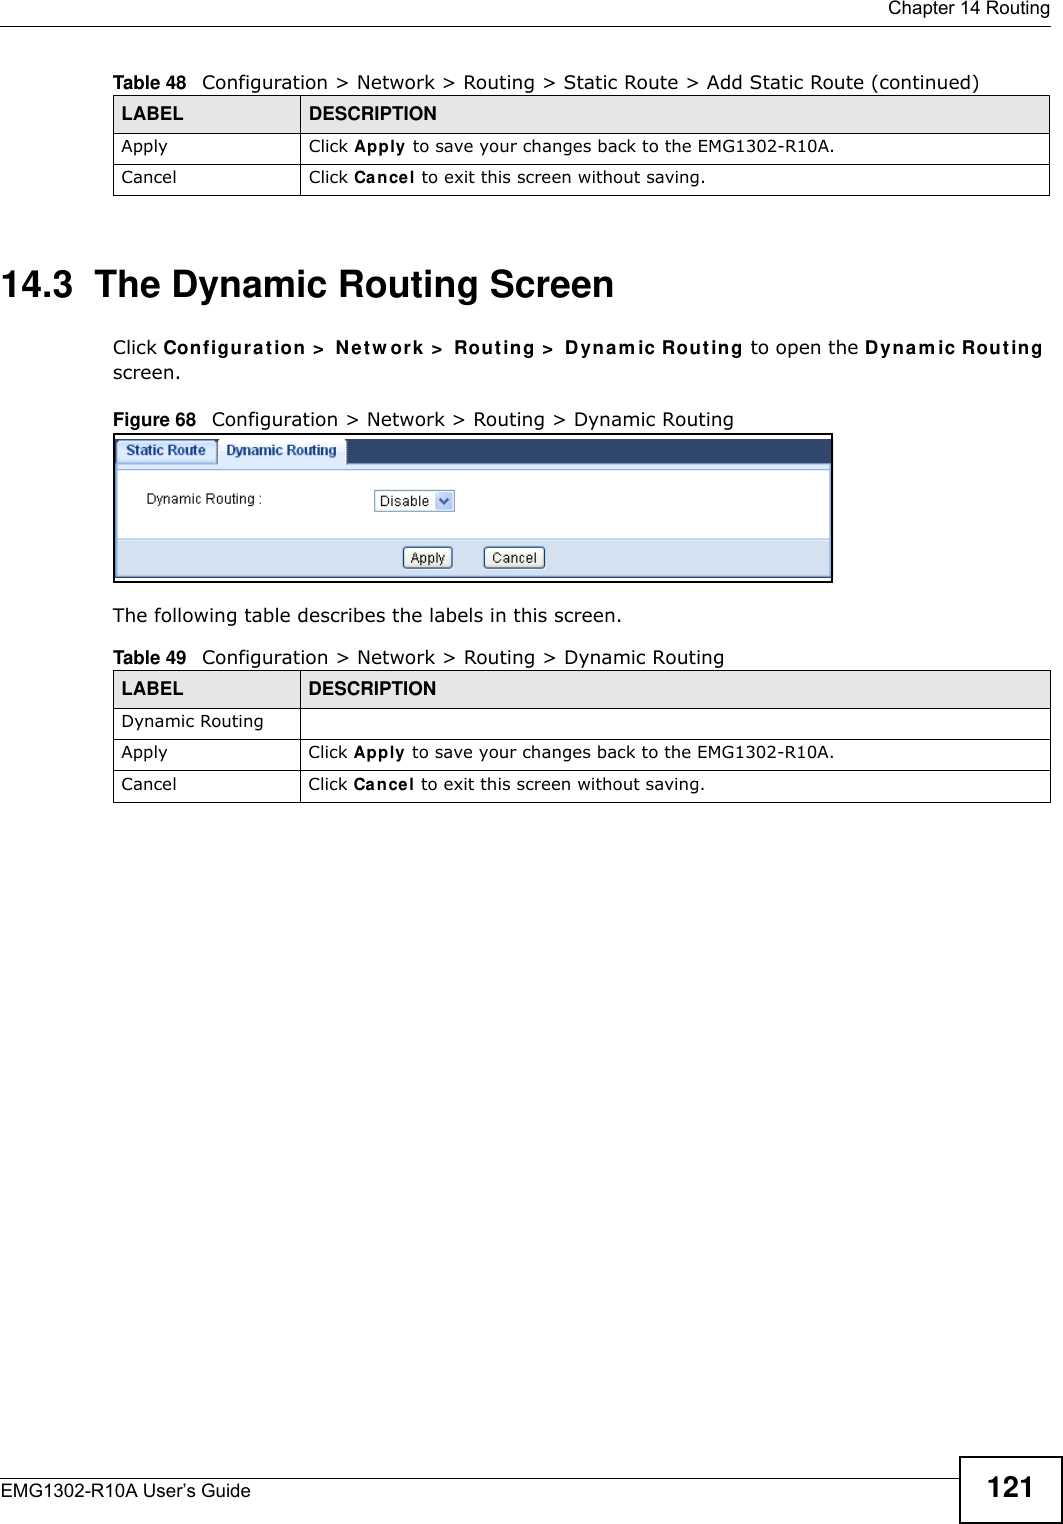  Chapter 14 RoutingEMG1302-R10A User’s Guide 12114.3  The Dynamic Routing Screen Click Configura t ion &gt;  Net w ork &gt;  Routing &gt;  Dynam ic Rout ing to open the Dynam ic Rout ing screen.Figure 68   Configuration &gt; Network &gt; Routing &gt; Dynamic RoutingThe following table describes the labels in this screen.Apply Click Apply to save your changes back to the EMG1302-R10A.Cancel Click Cancel to exit this screen without saving.Table 48   Configuration &gt; Network &gt; Routing &gt; Static Route &gt; Add Static Route (continued)LABEL DESCRIPTIONTable 49   Configuration &gt; Network &gt; Routing &gt; Dynamic RoutingLABEL DESCRIPTIONDynamic RoutingApply Click Apply to save your changes back to the EMG1302-R10A.Cancel Click Cancel to exit this screen without saving.